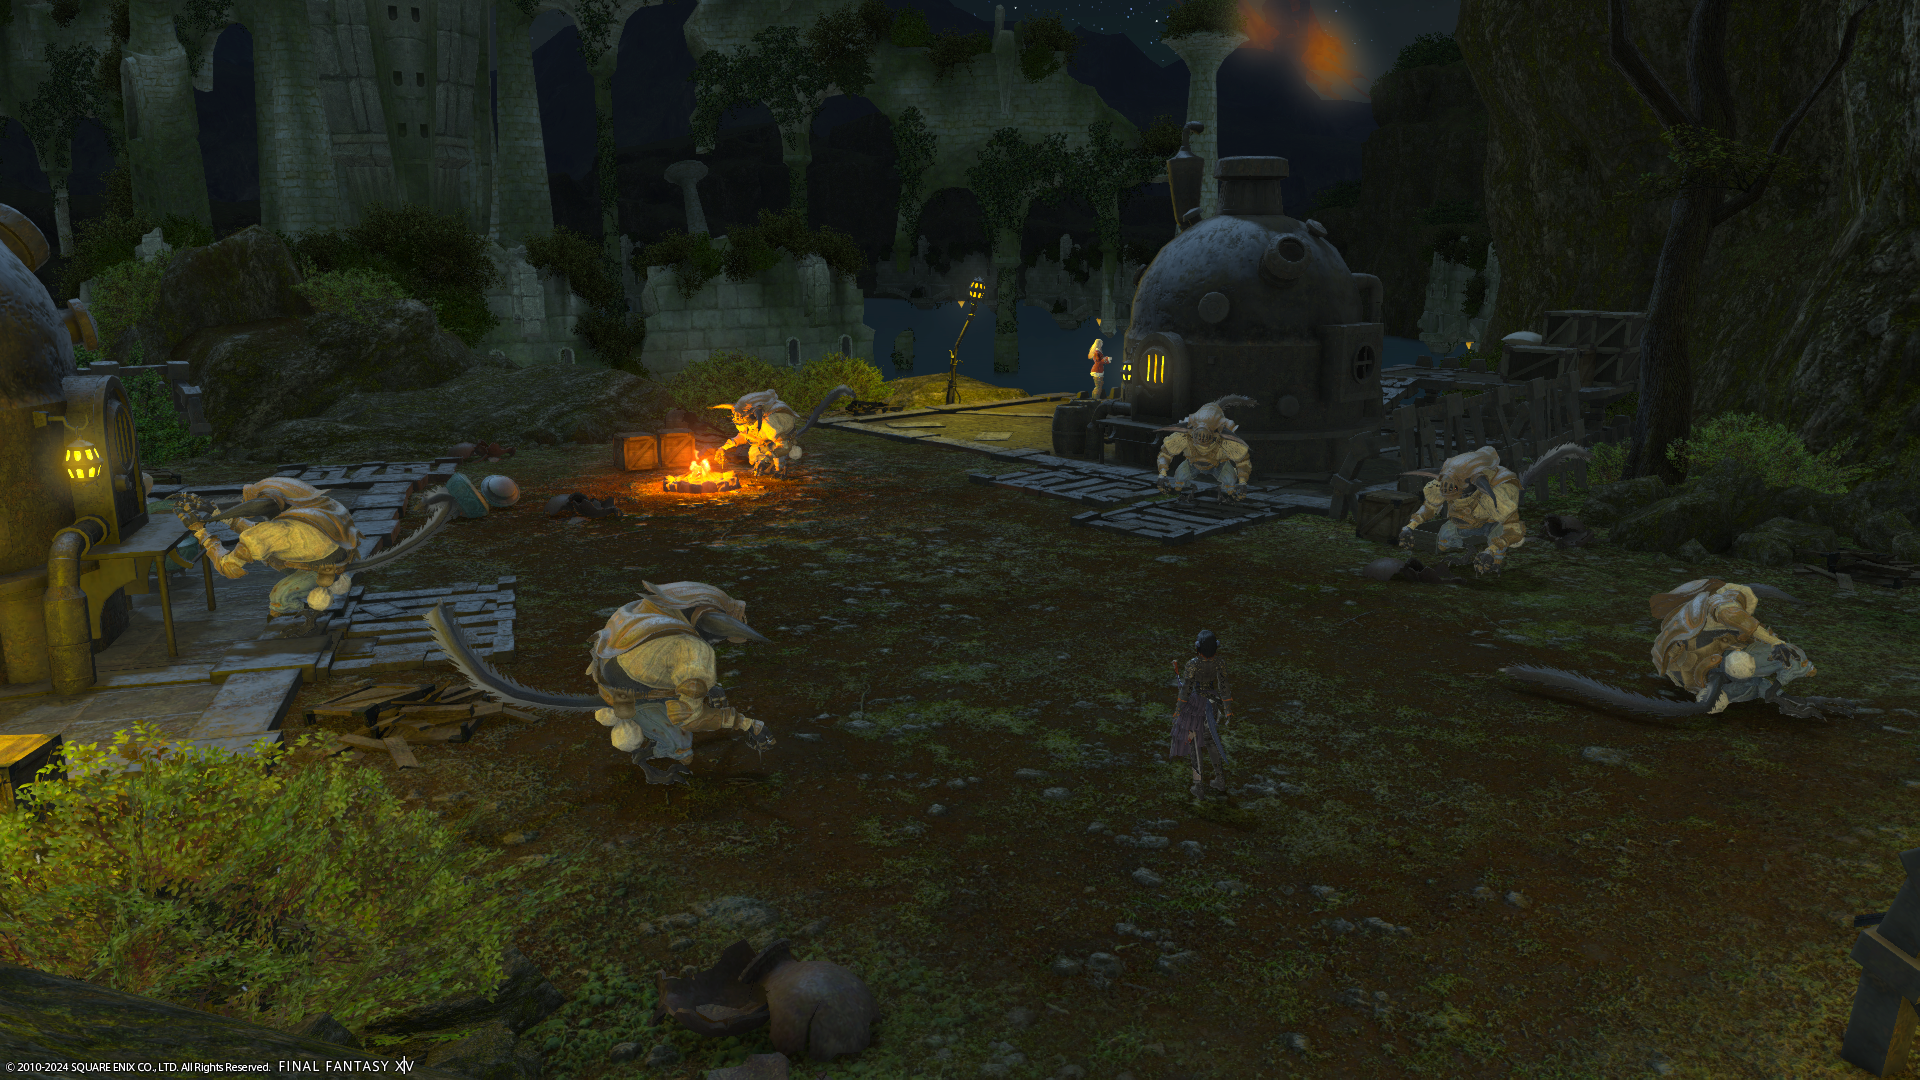 An image showing Kobolds in the night.